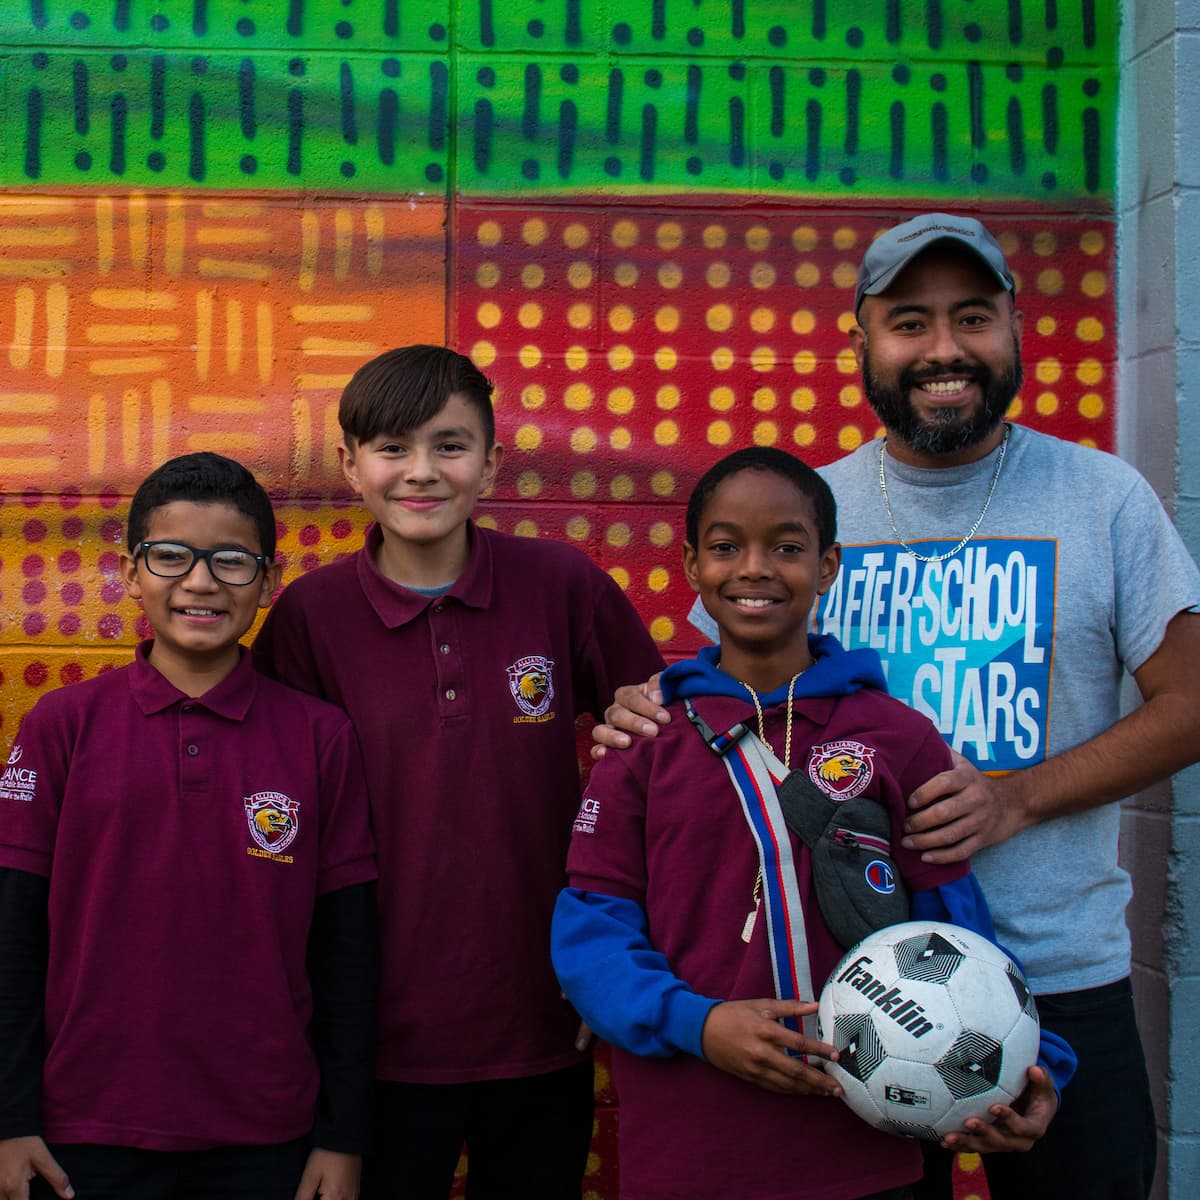 Coach and soccer players standing in front of colorful wall